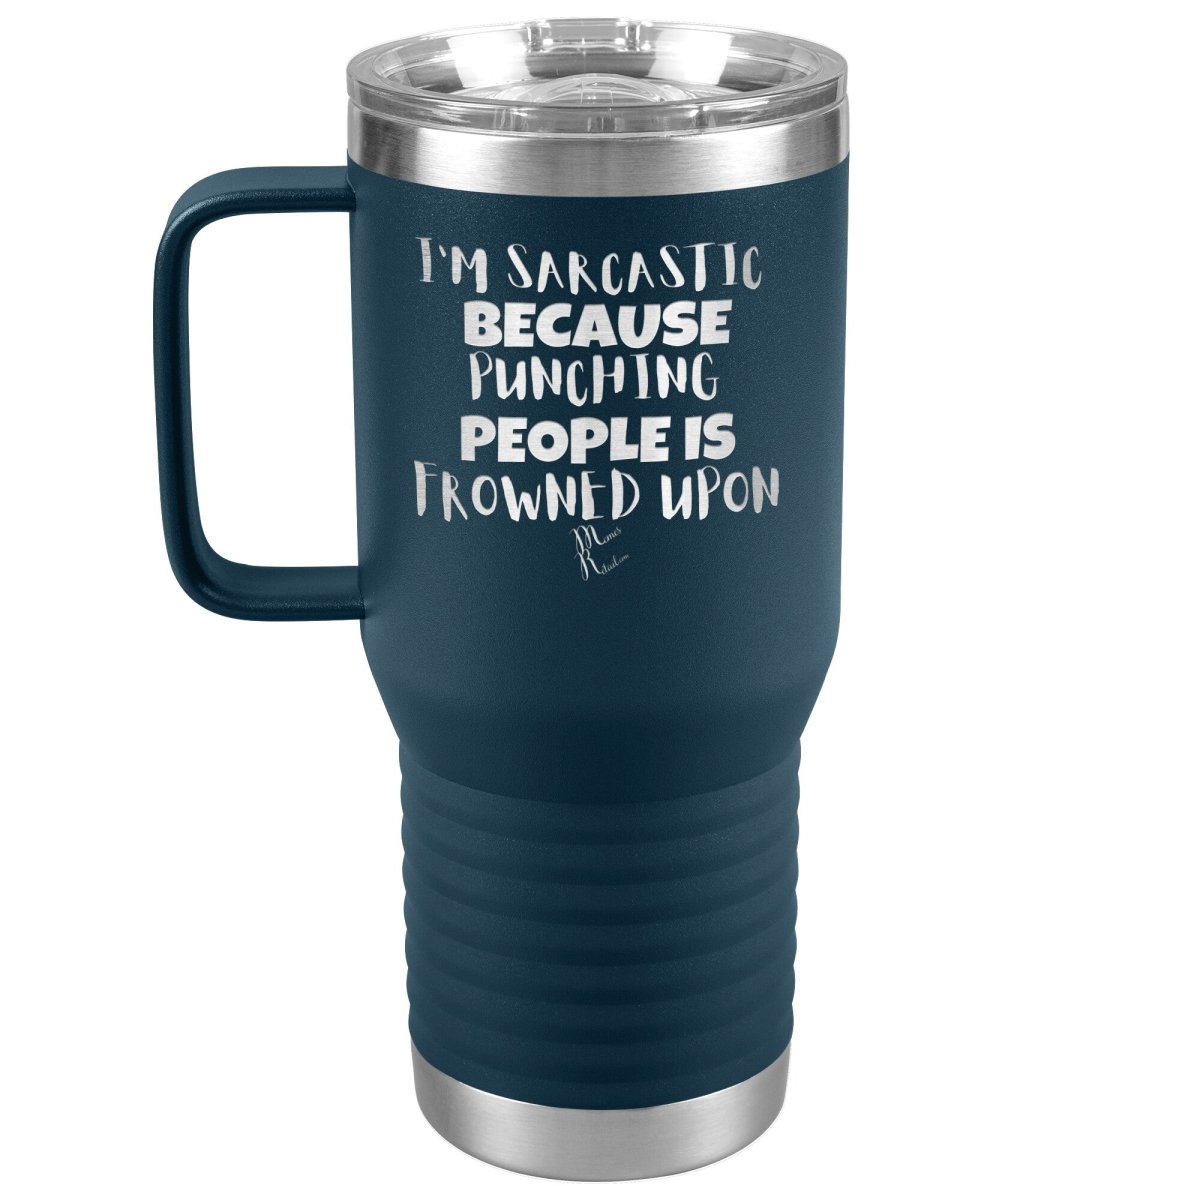 I'm Sarcastic Because Punching People is Frowned Upon Tumblers, 20oz Travel Tumbler / Navy - MemesRetail.com